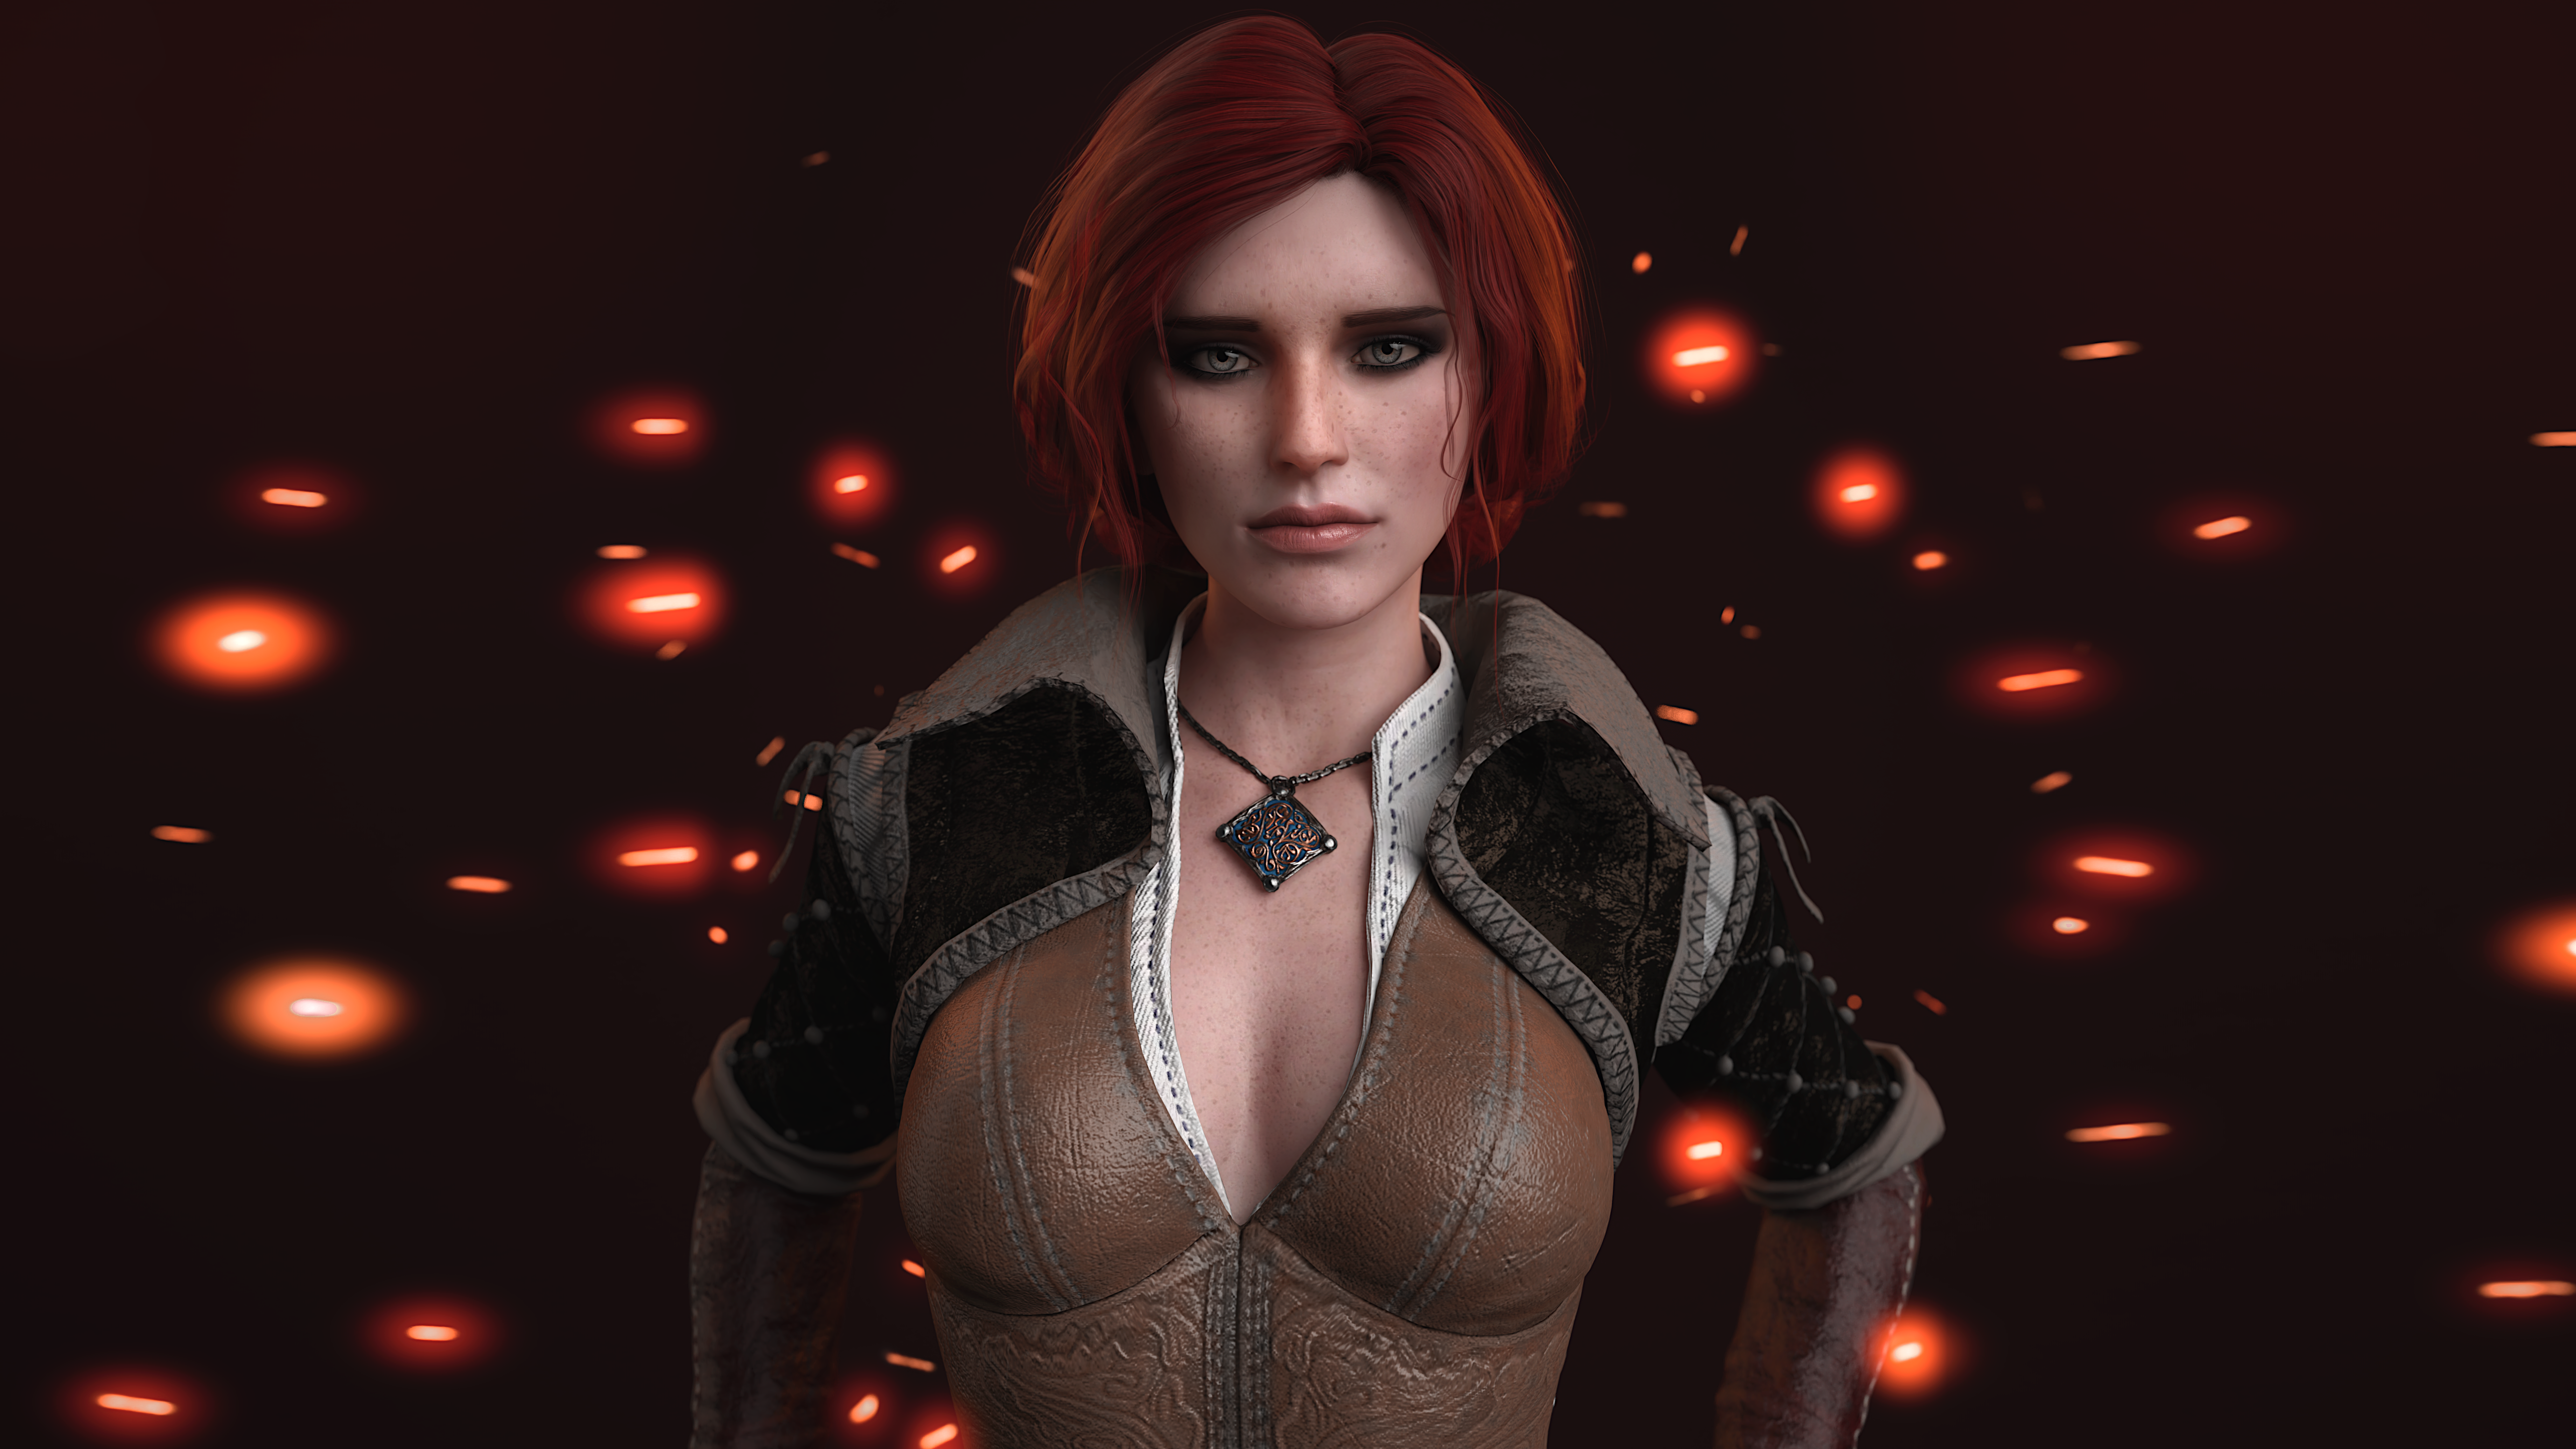 General 5150x2897 Triss Merigold The Witcher video games video game girls video game characters women fantasy art video game art fantasy girl necklace redhead face shoulder length hair sparkles PC gaming The Witcher 3: Wild Hunt Miss Ally